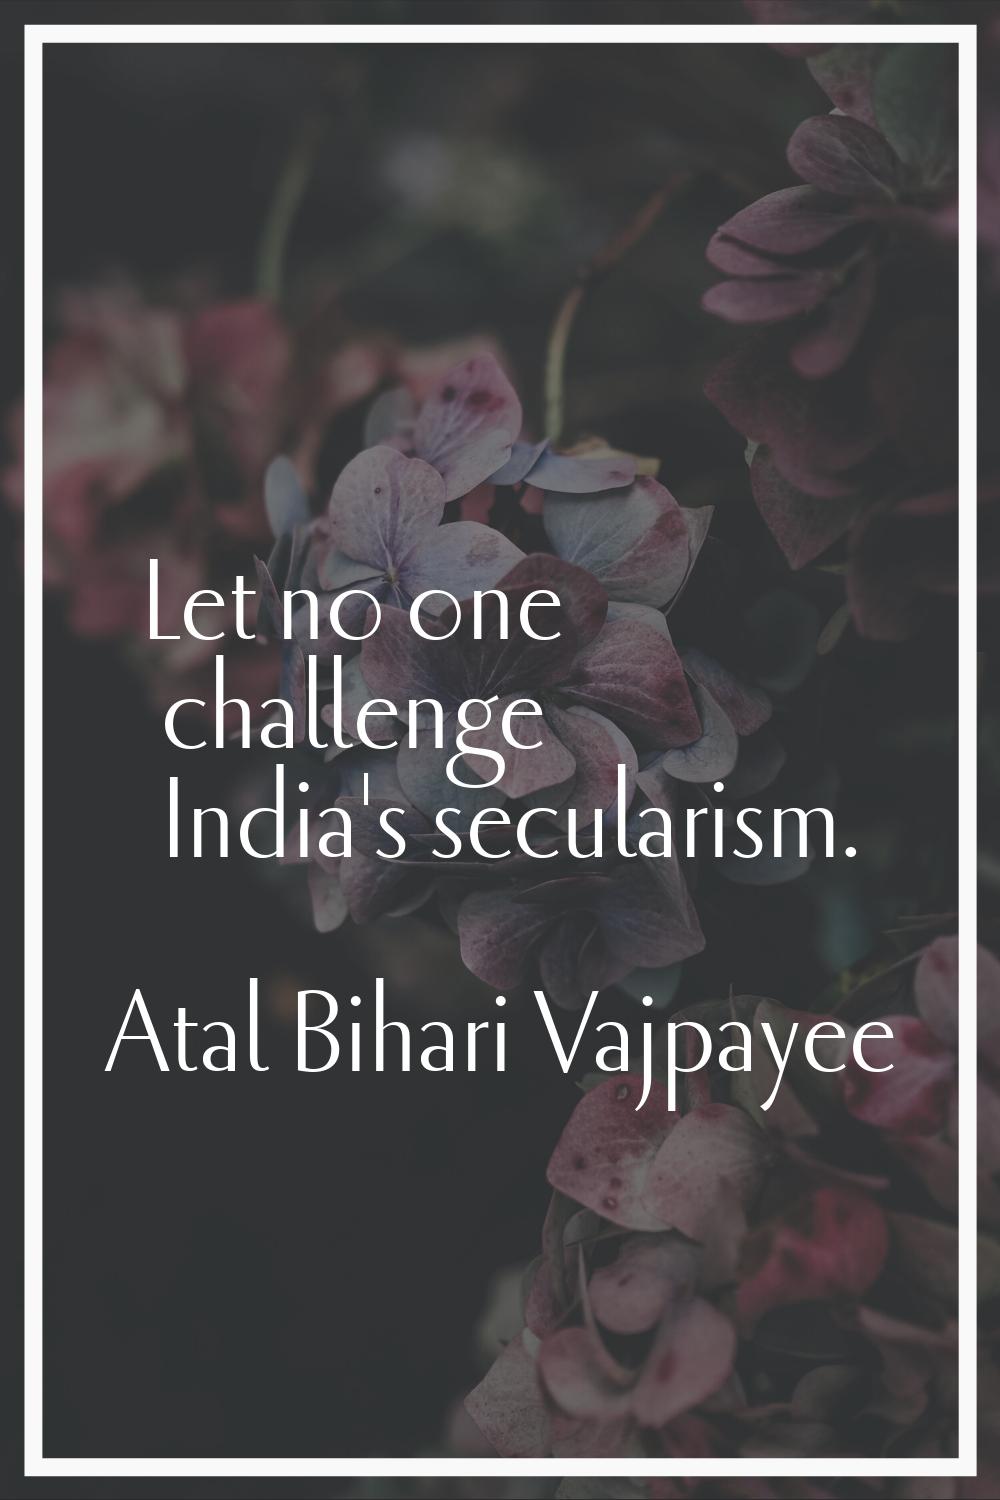 Let no one challenge India's secularism.